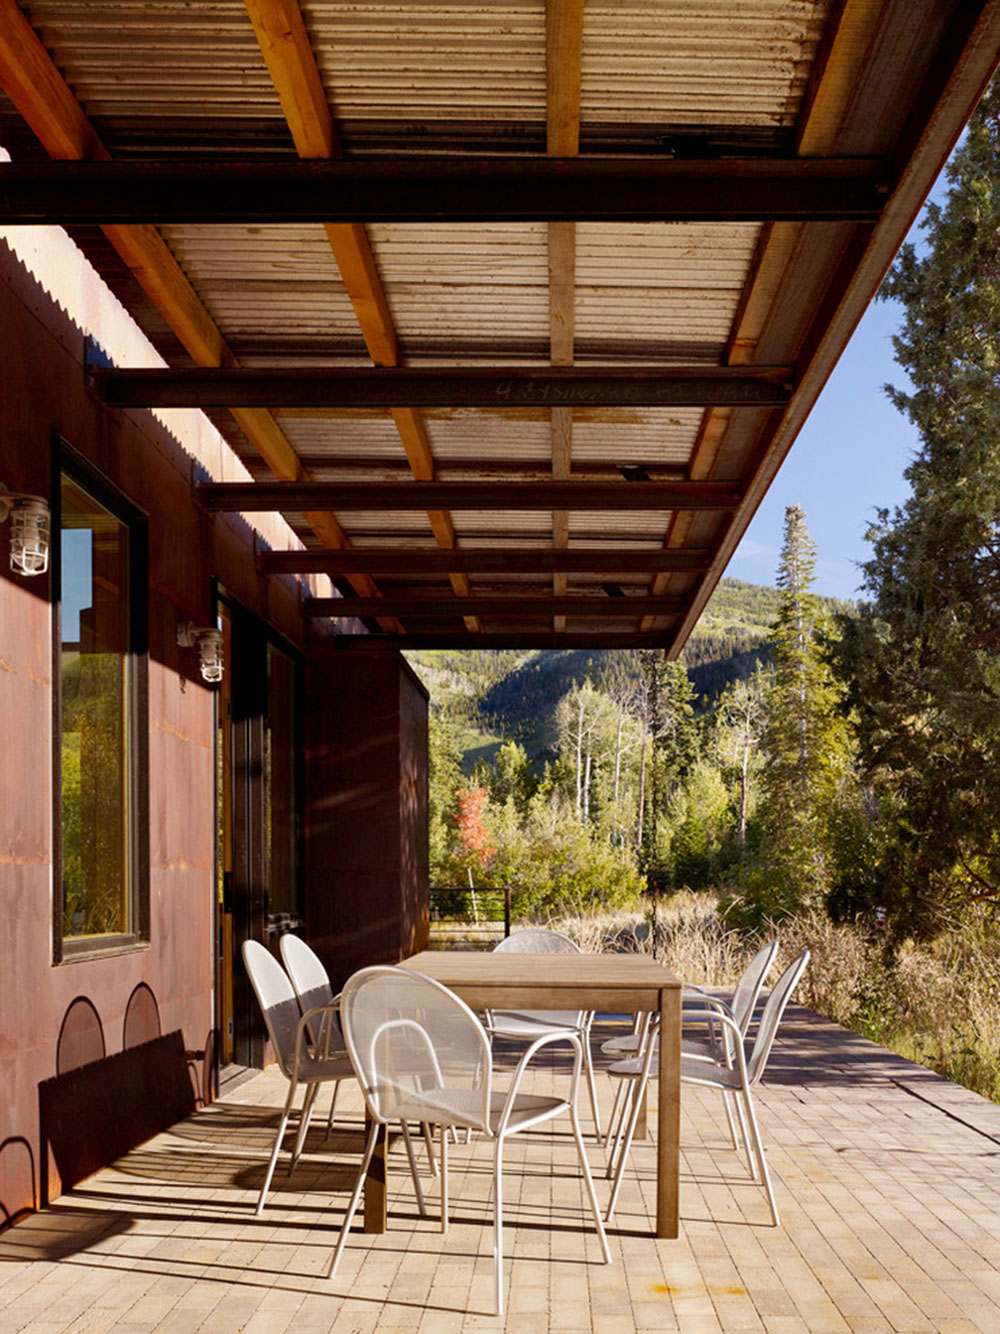 Aspen Creek Residence by Carney Logan Burke Architects Covered Decks Ideas You Should Try for Your Home